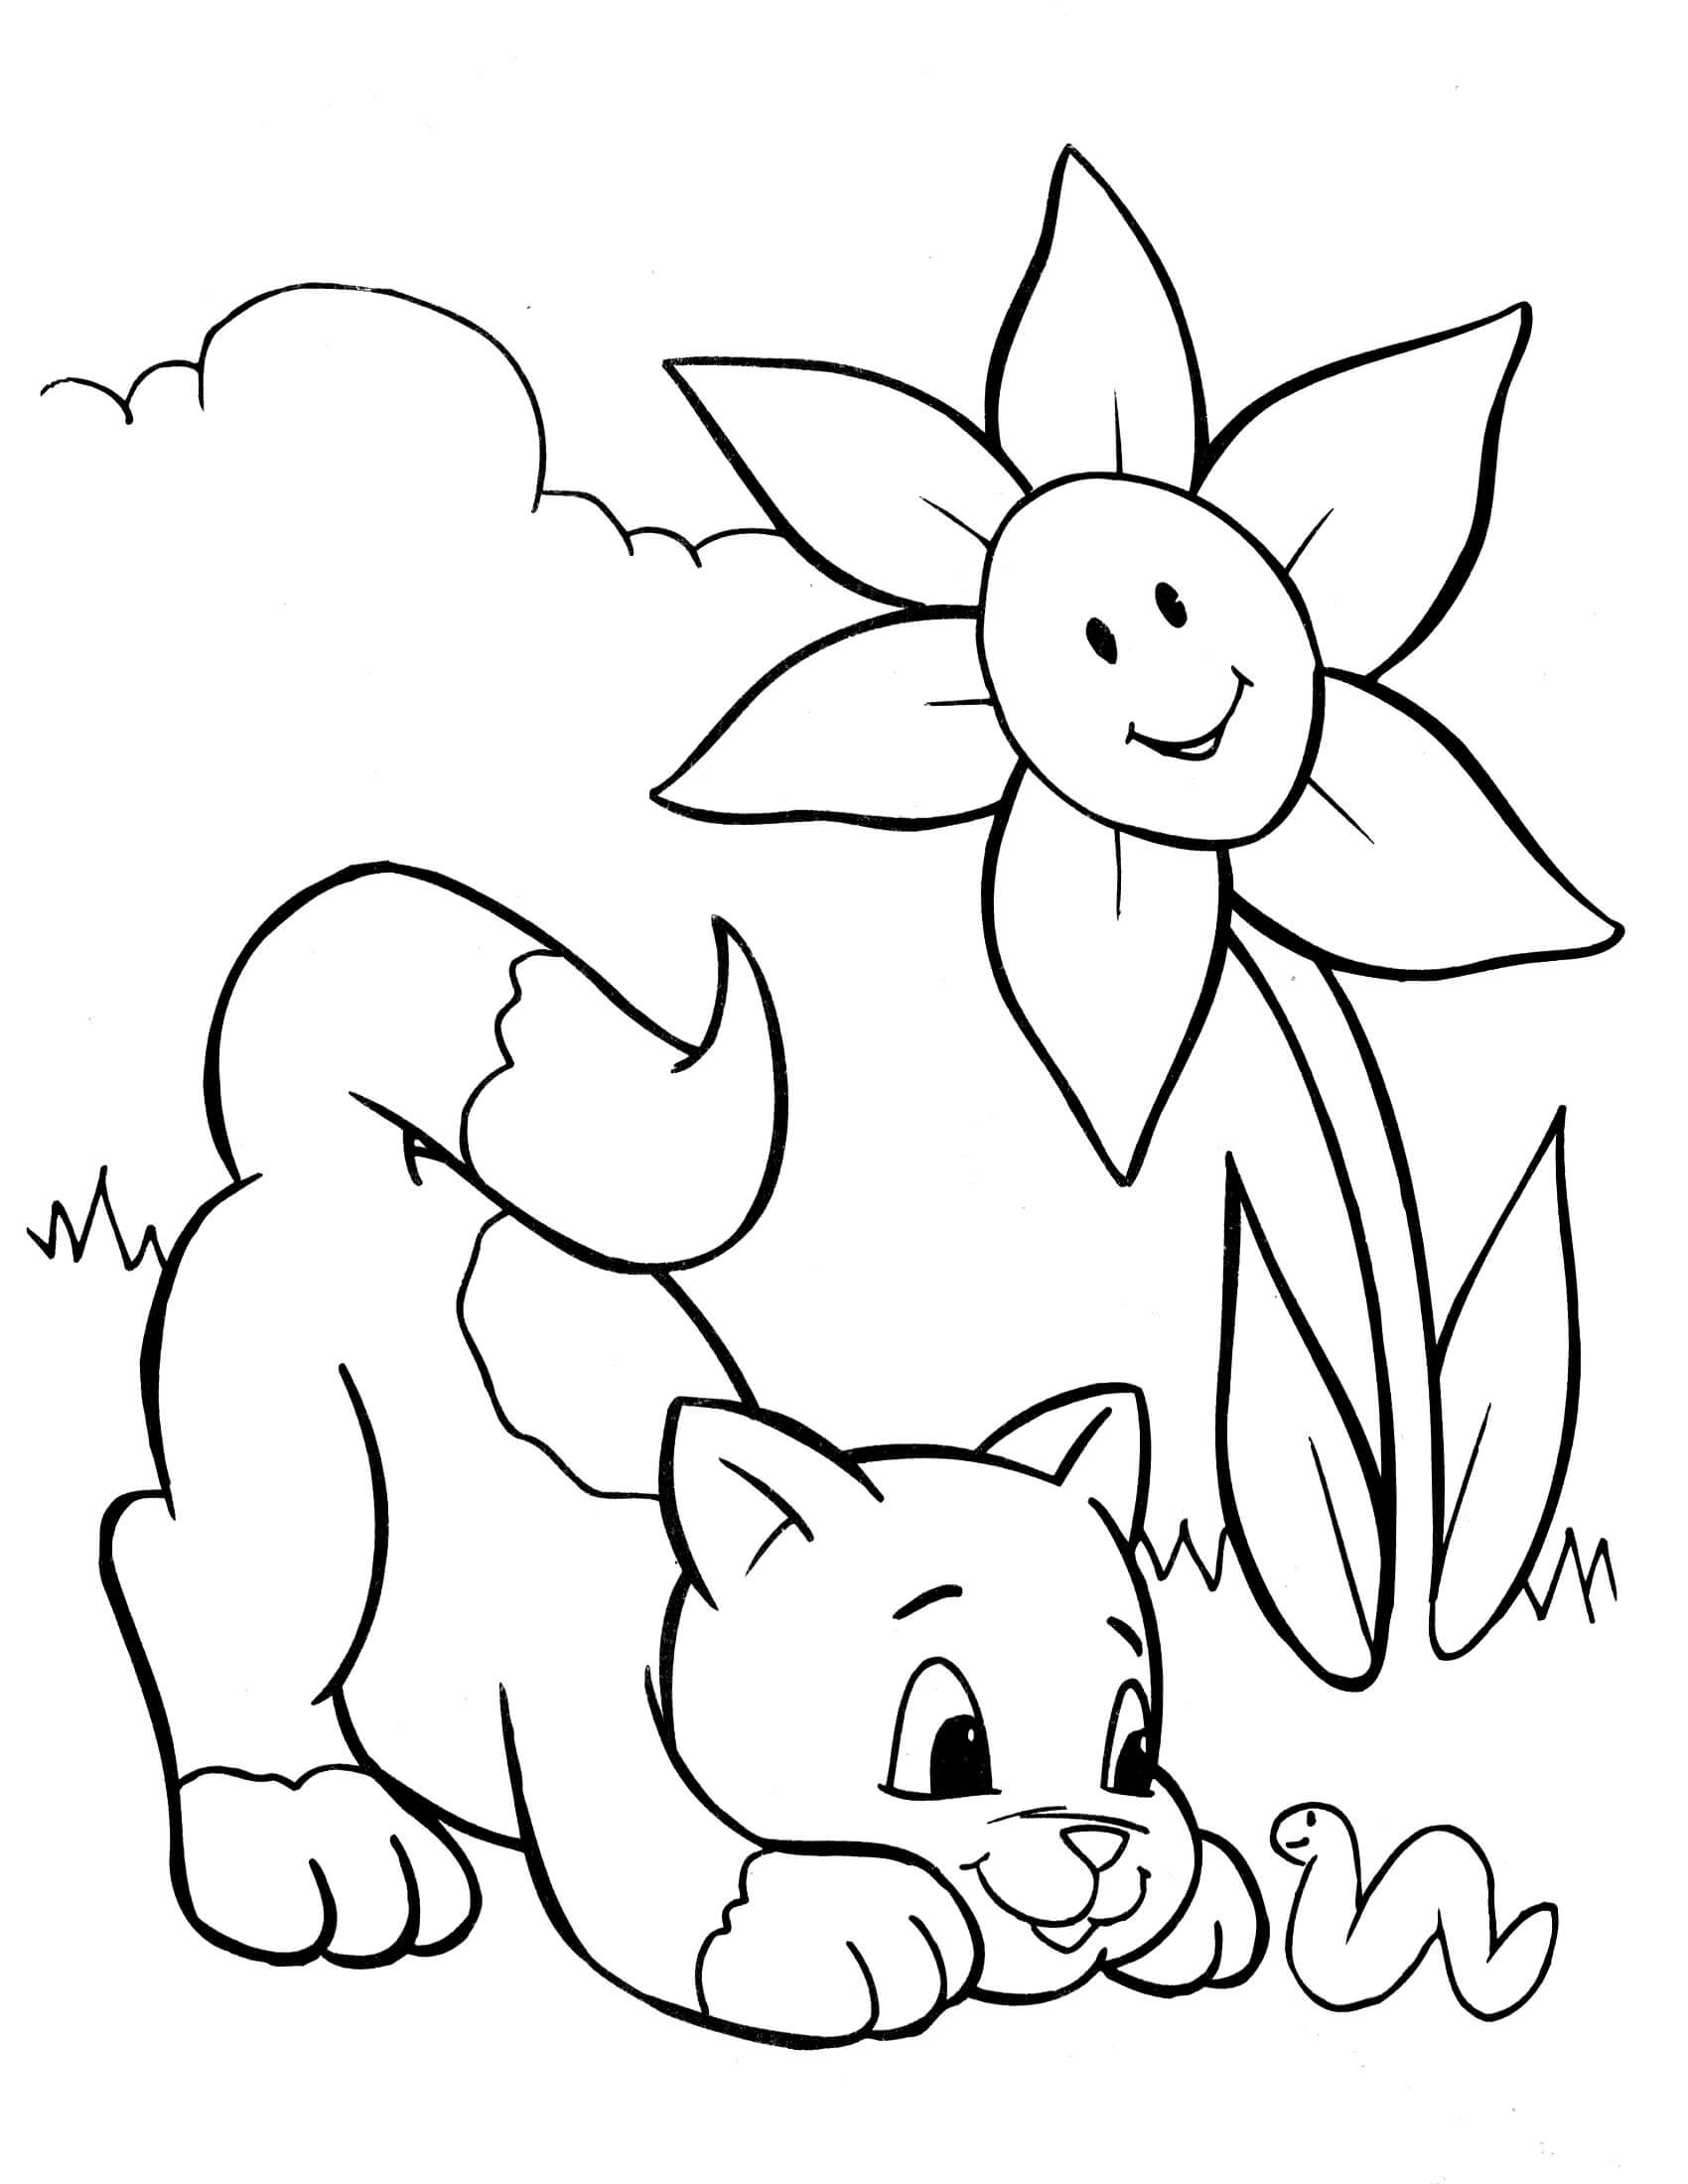 Crayola Coloring Pages For Girls
 Crayola 12 – Coloringcolor